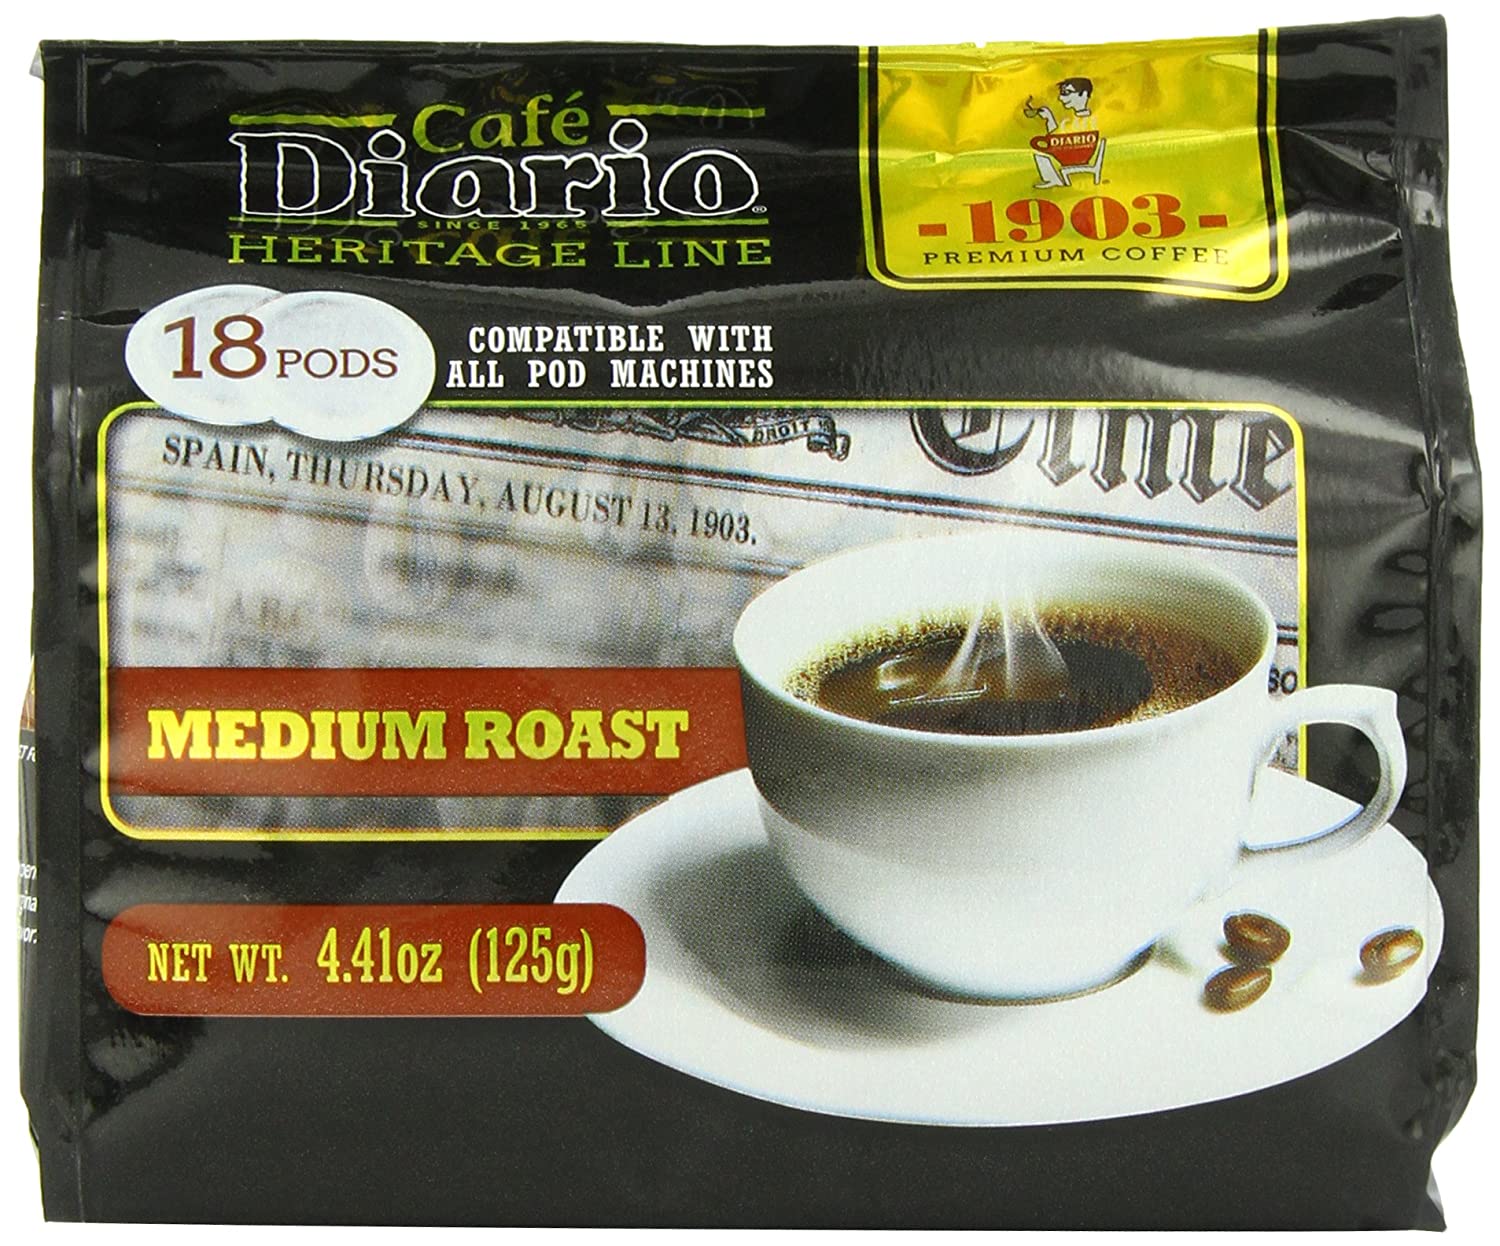 6-Pack 18 Count (Total 108) Cafe Diario Heritage Line 1903 Medium Roast Coffee Pods $7.57 + Free Shipping w/ Prime or on $25+ @ Amazon